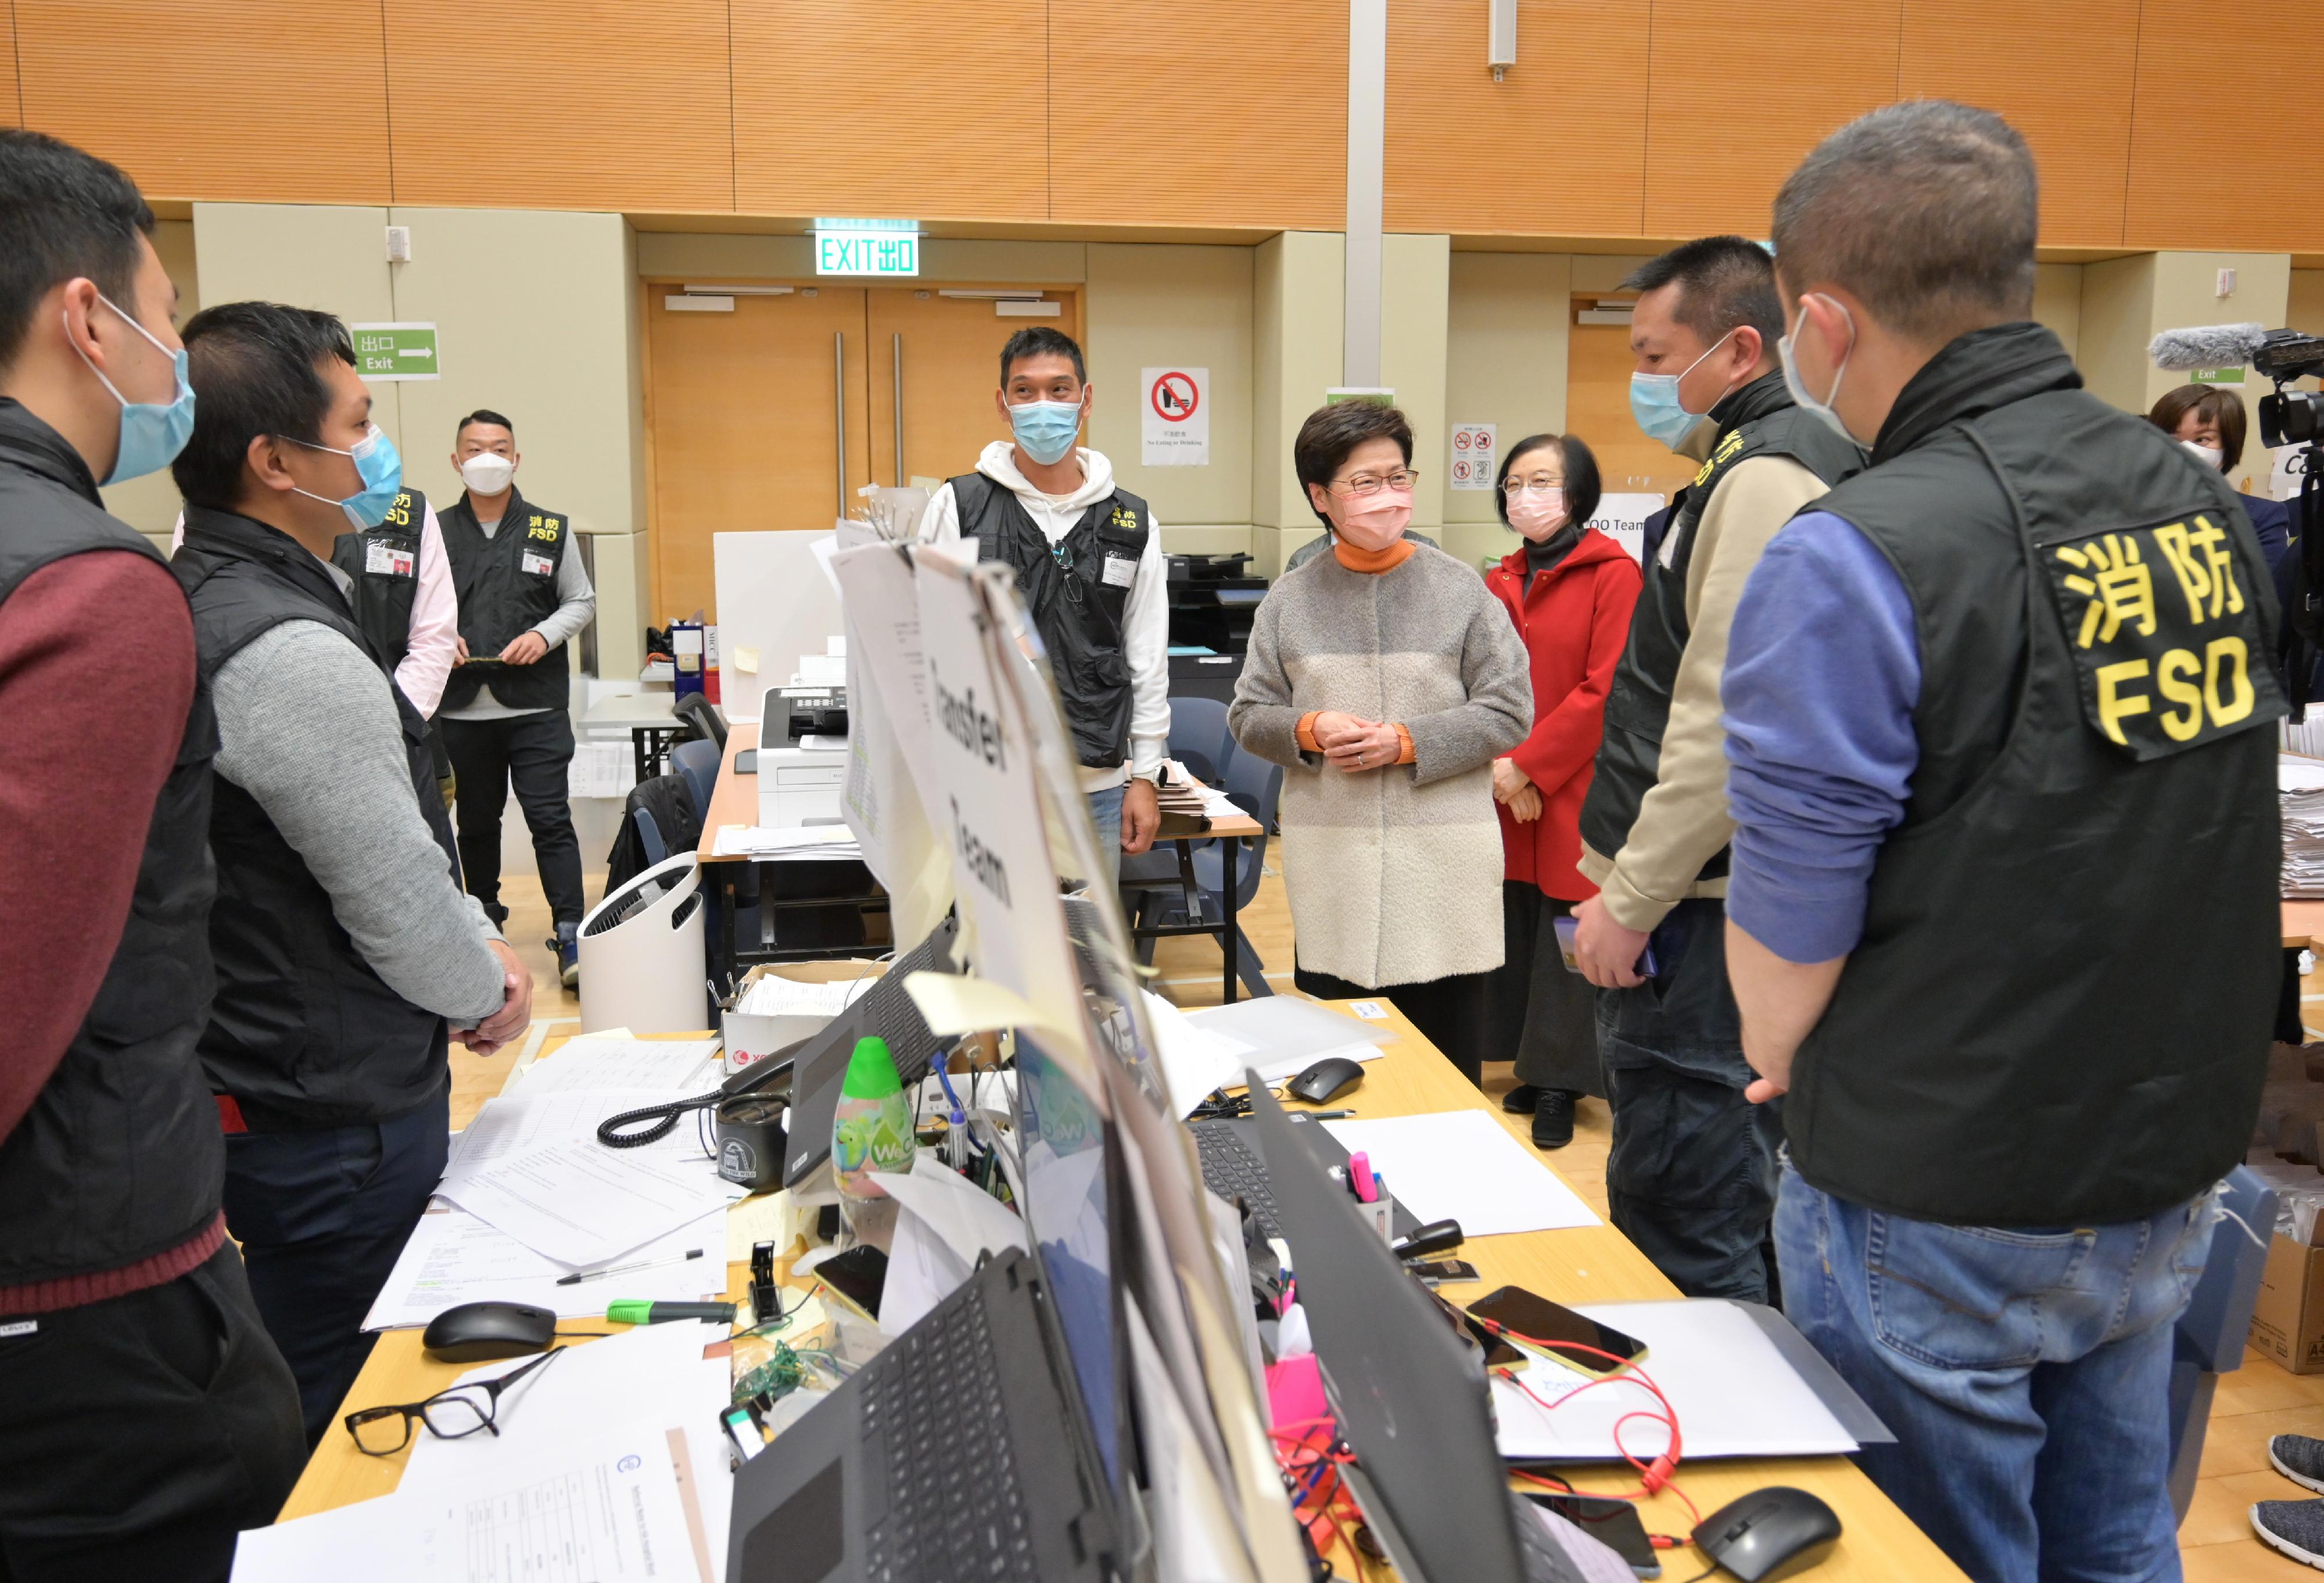 The Chief Executive, Mrs Carrie Lam, visited the Contact Tracing Offices in Kai Tak and Mong Kok today (February 1). Photo shows Mrs Lam (fourth right) chatting with officers of the Fire Services Department at the Contact Tracing Office in Kai Tak. Looking on is the Secretary for Food and Health, Professor Sophia Chan (third right).